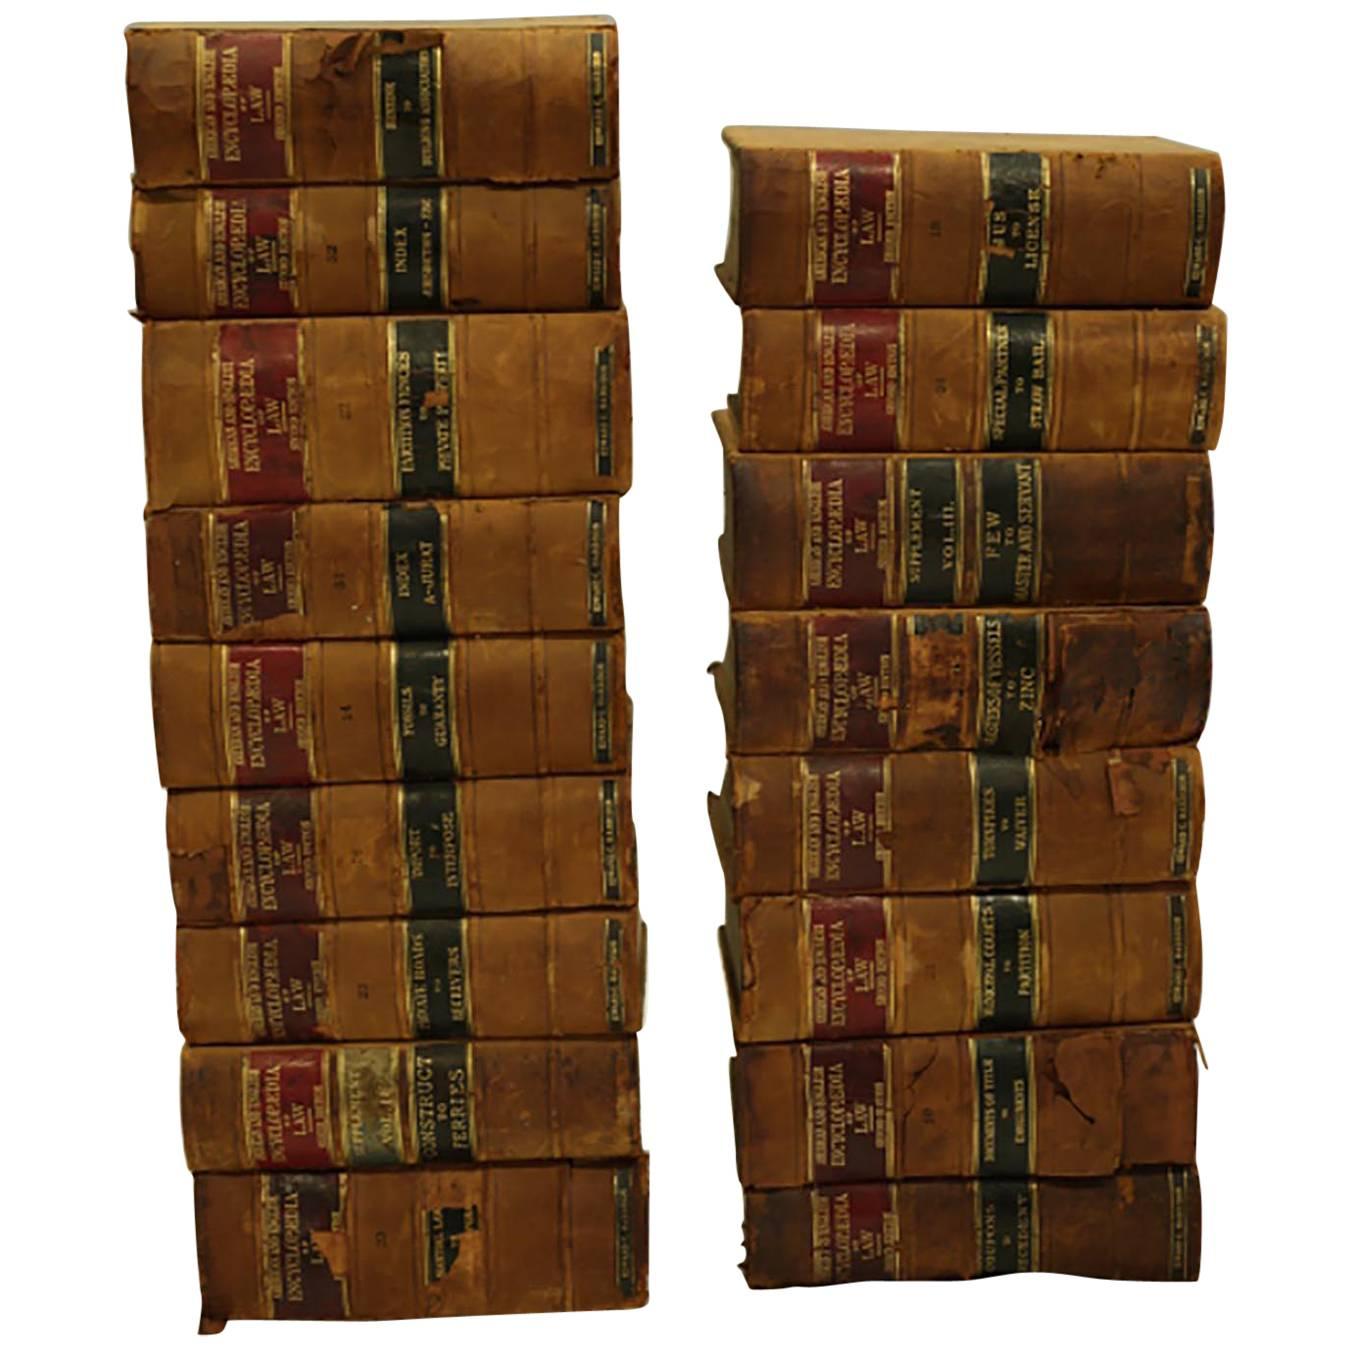 Turn of the Century Leather Bound "Encyclopedia of Law" Books, circa 1901-1906